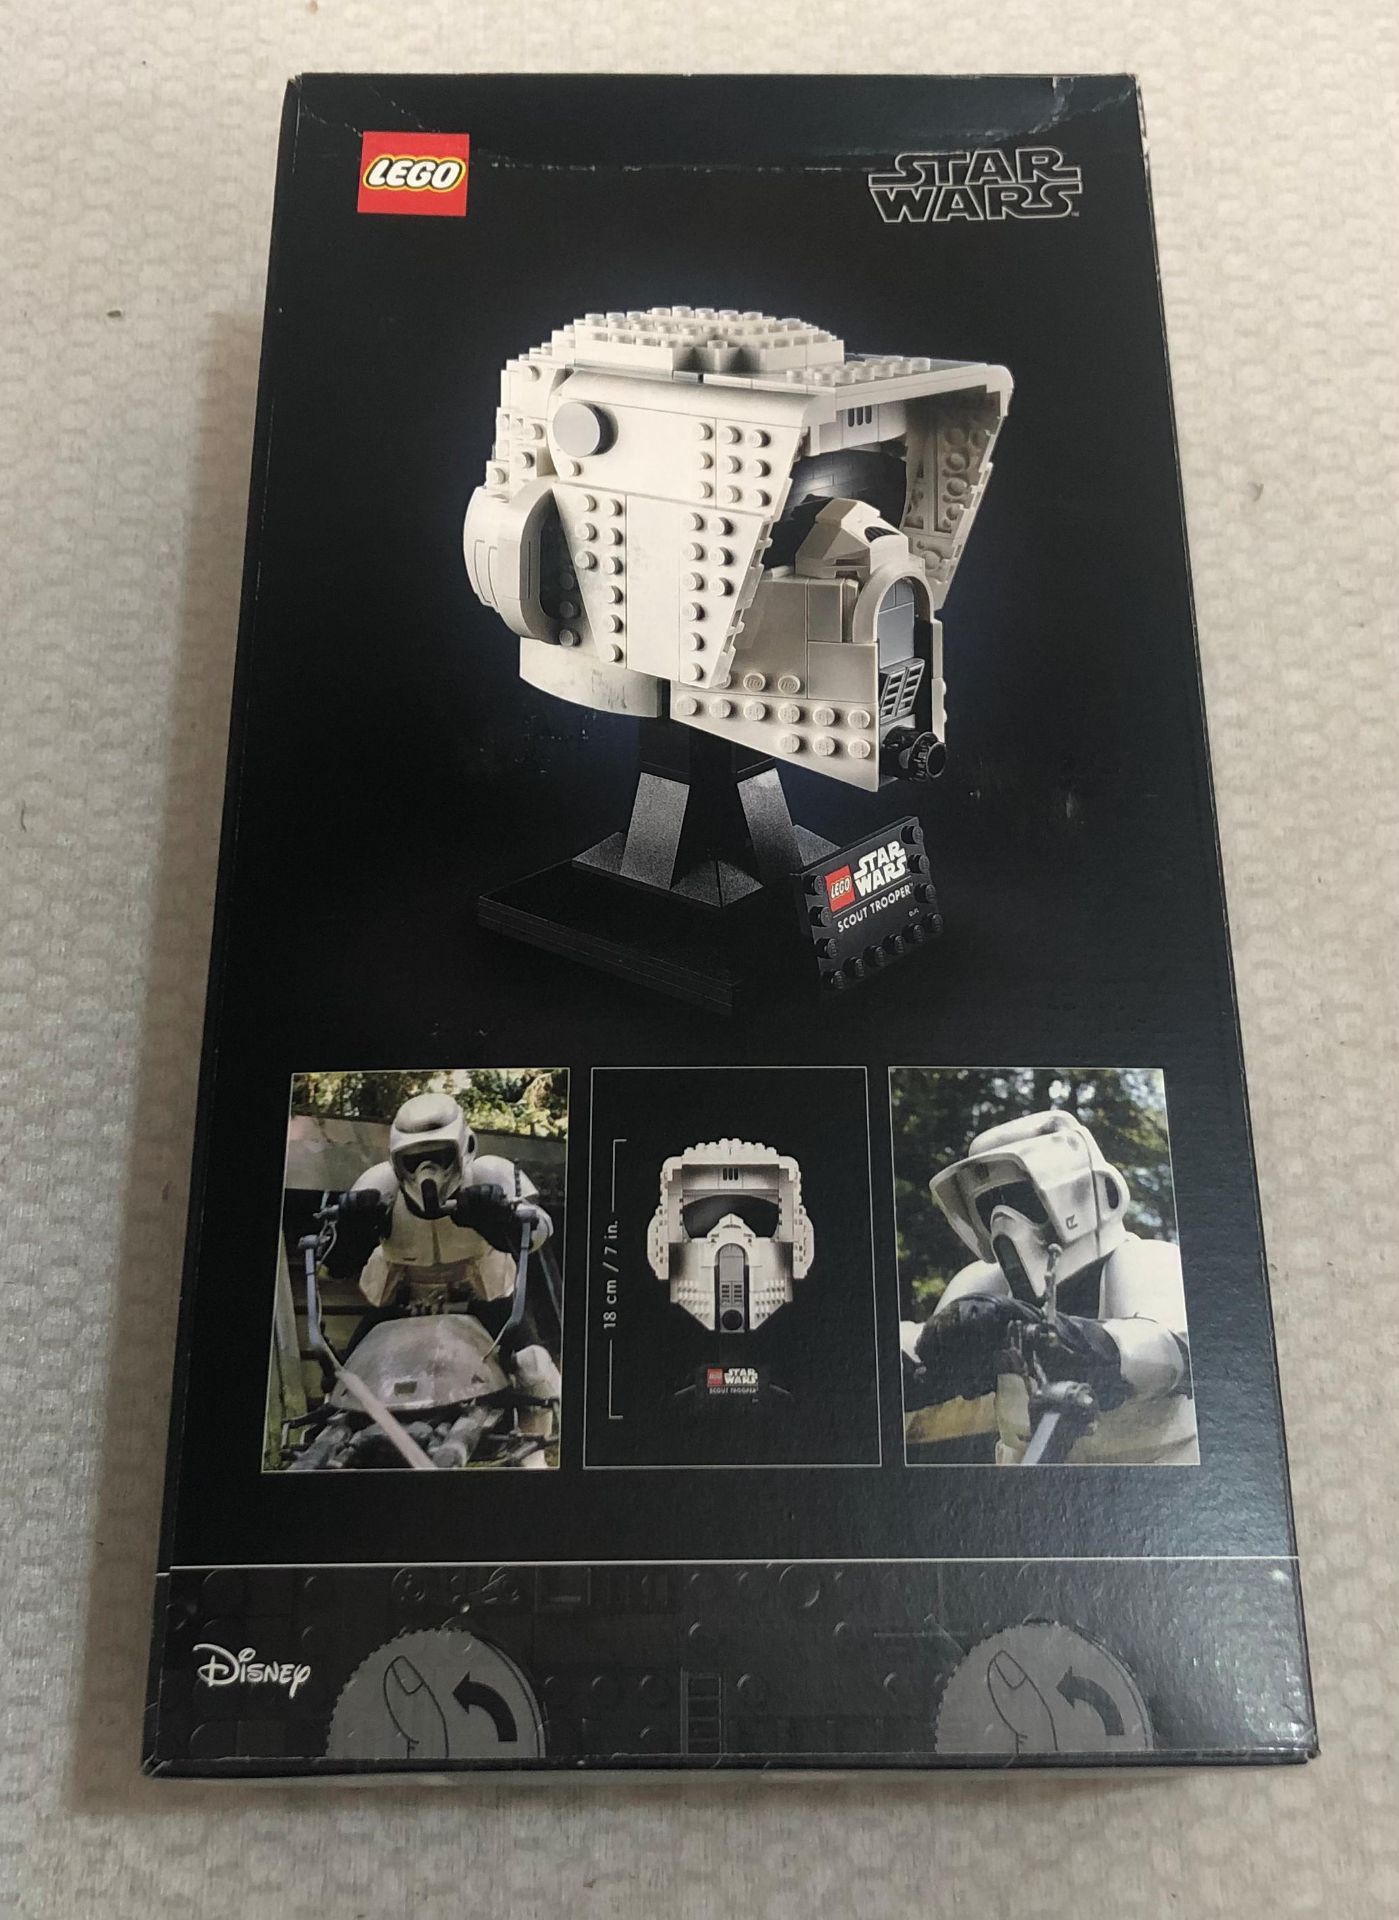 1 x Lego Star Wars Scout Trooper Helmet - Model 75305 - New/Boxed - Image 6 of 6